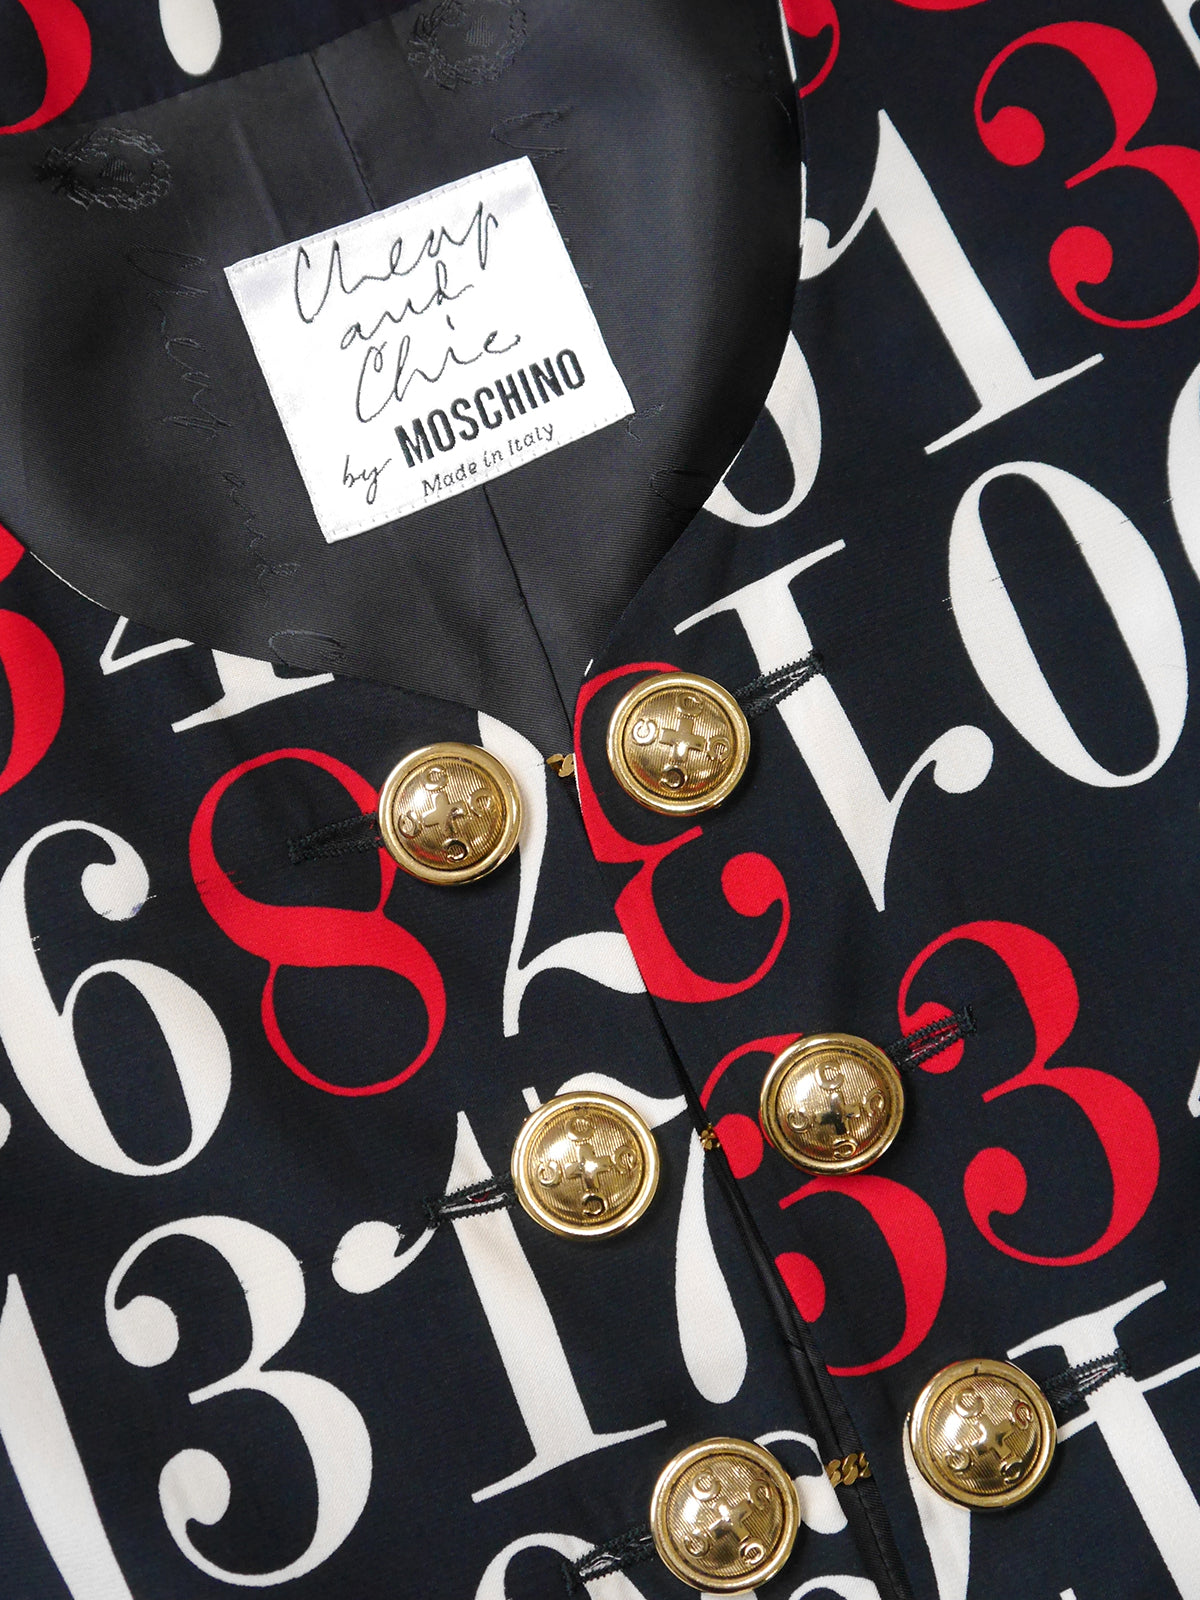 MOSCHINO 1990s Vintage Numbers Print Cropped Bolero Jacket w/ Cufflink Style Buttons